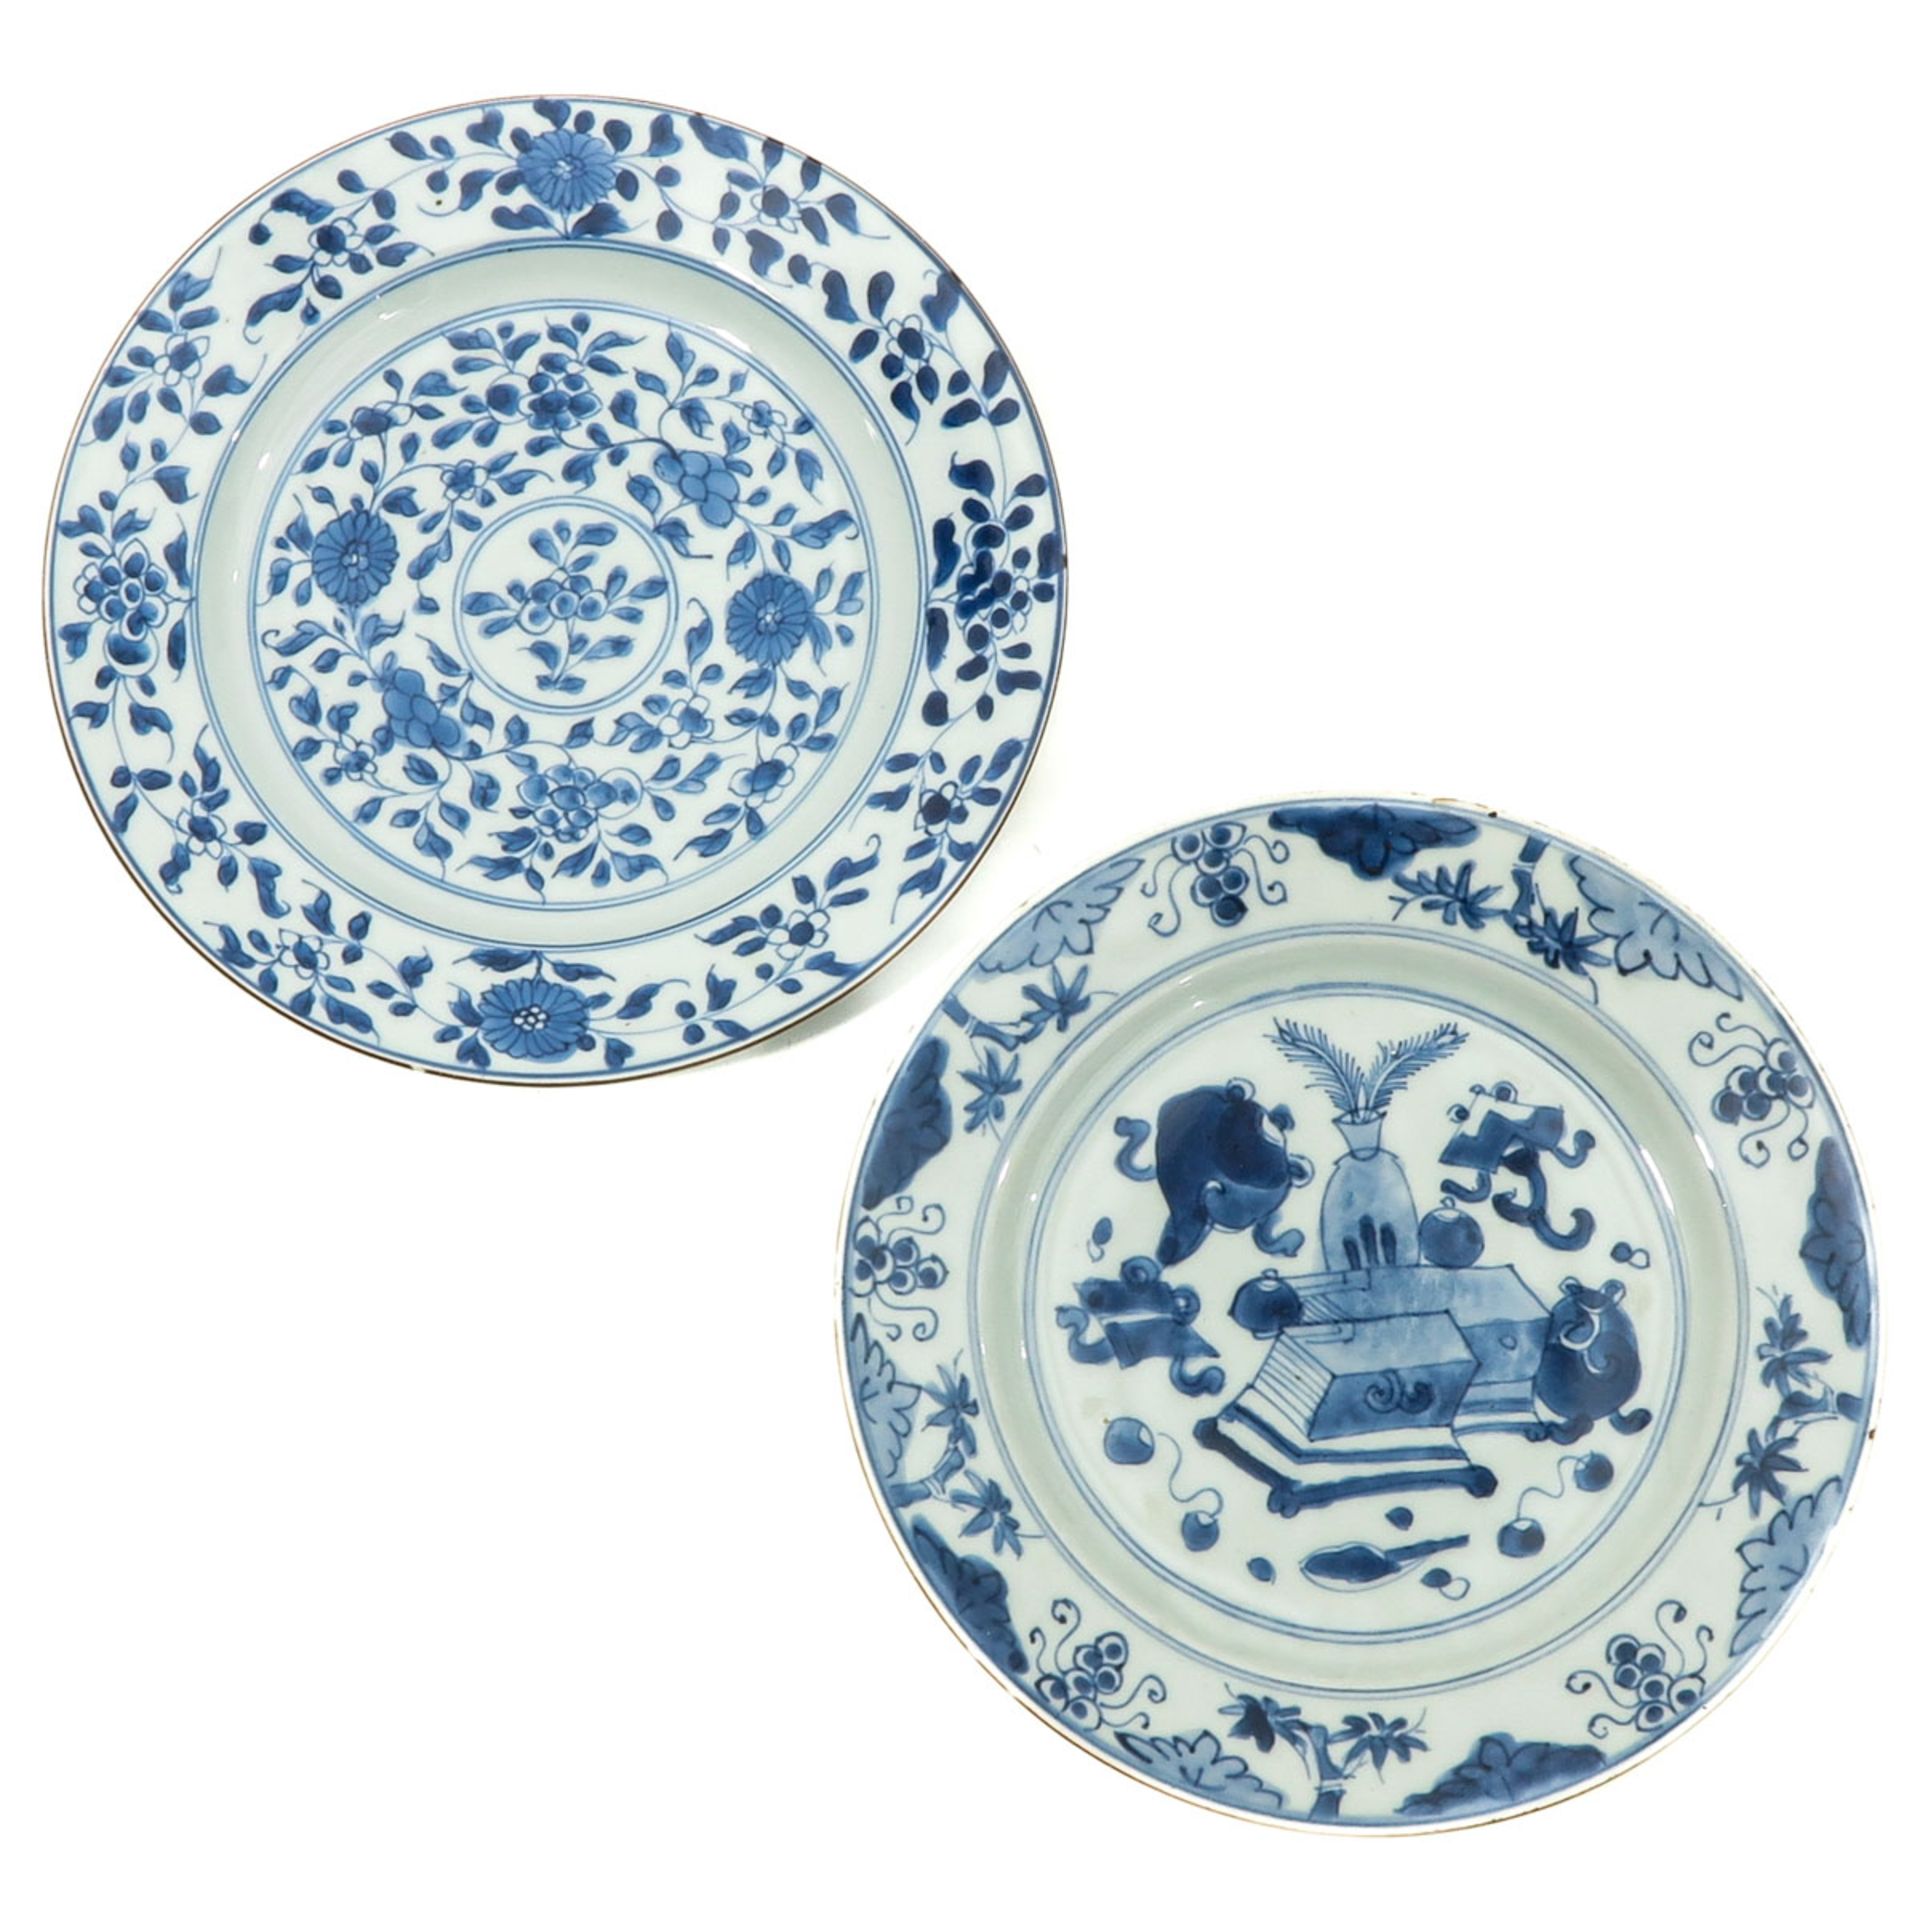 A Collection of 6 Blue and White Plates - Bild 3 aus 10